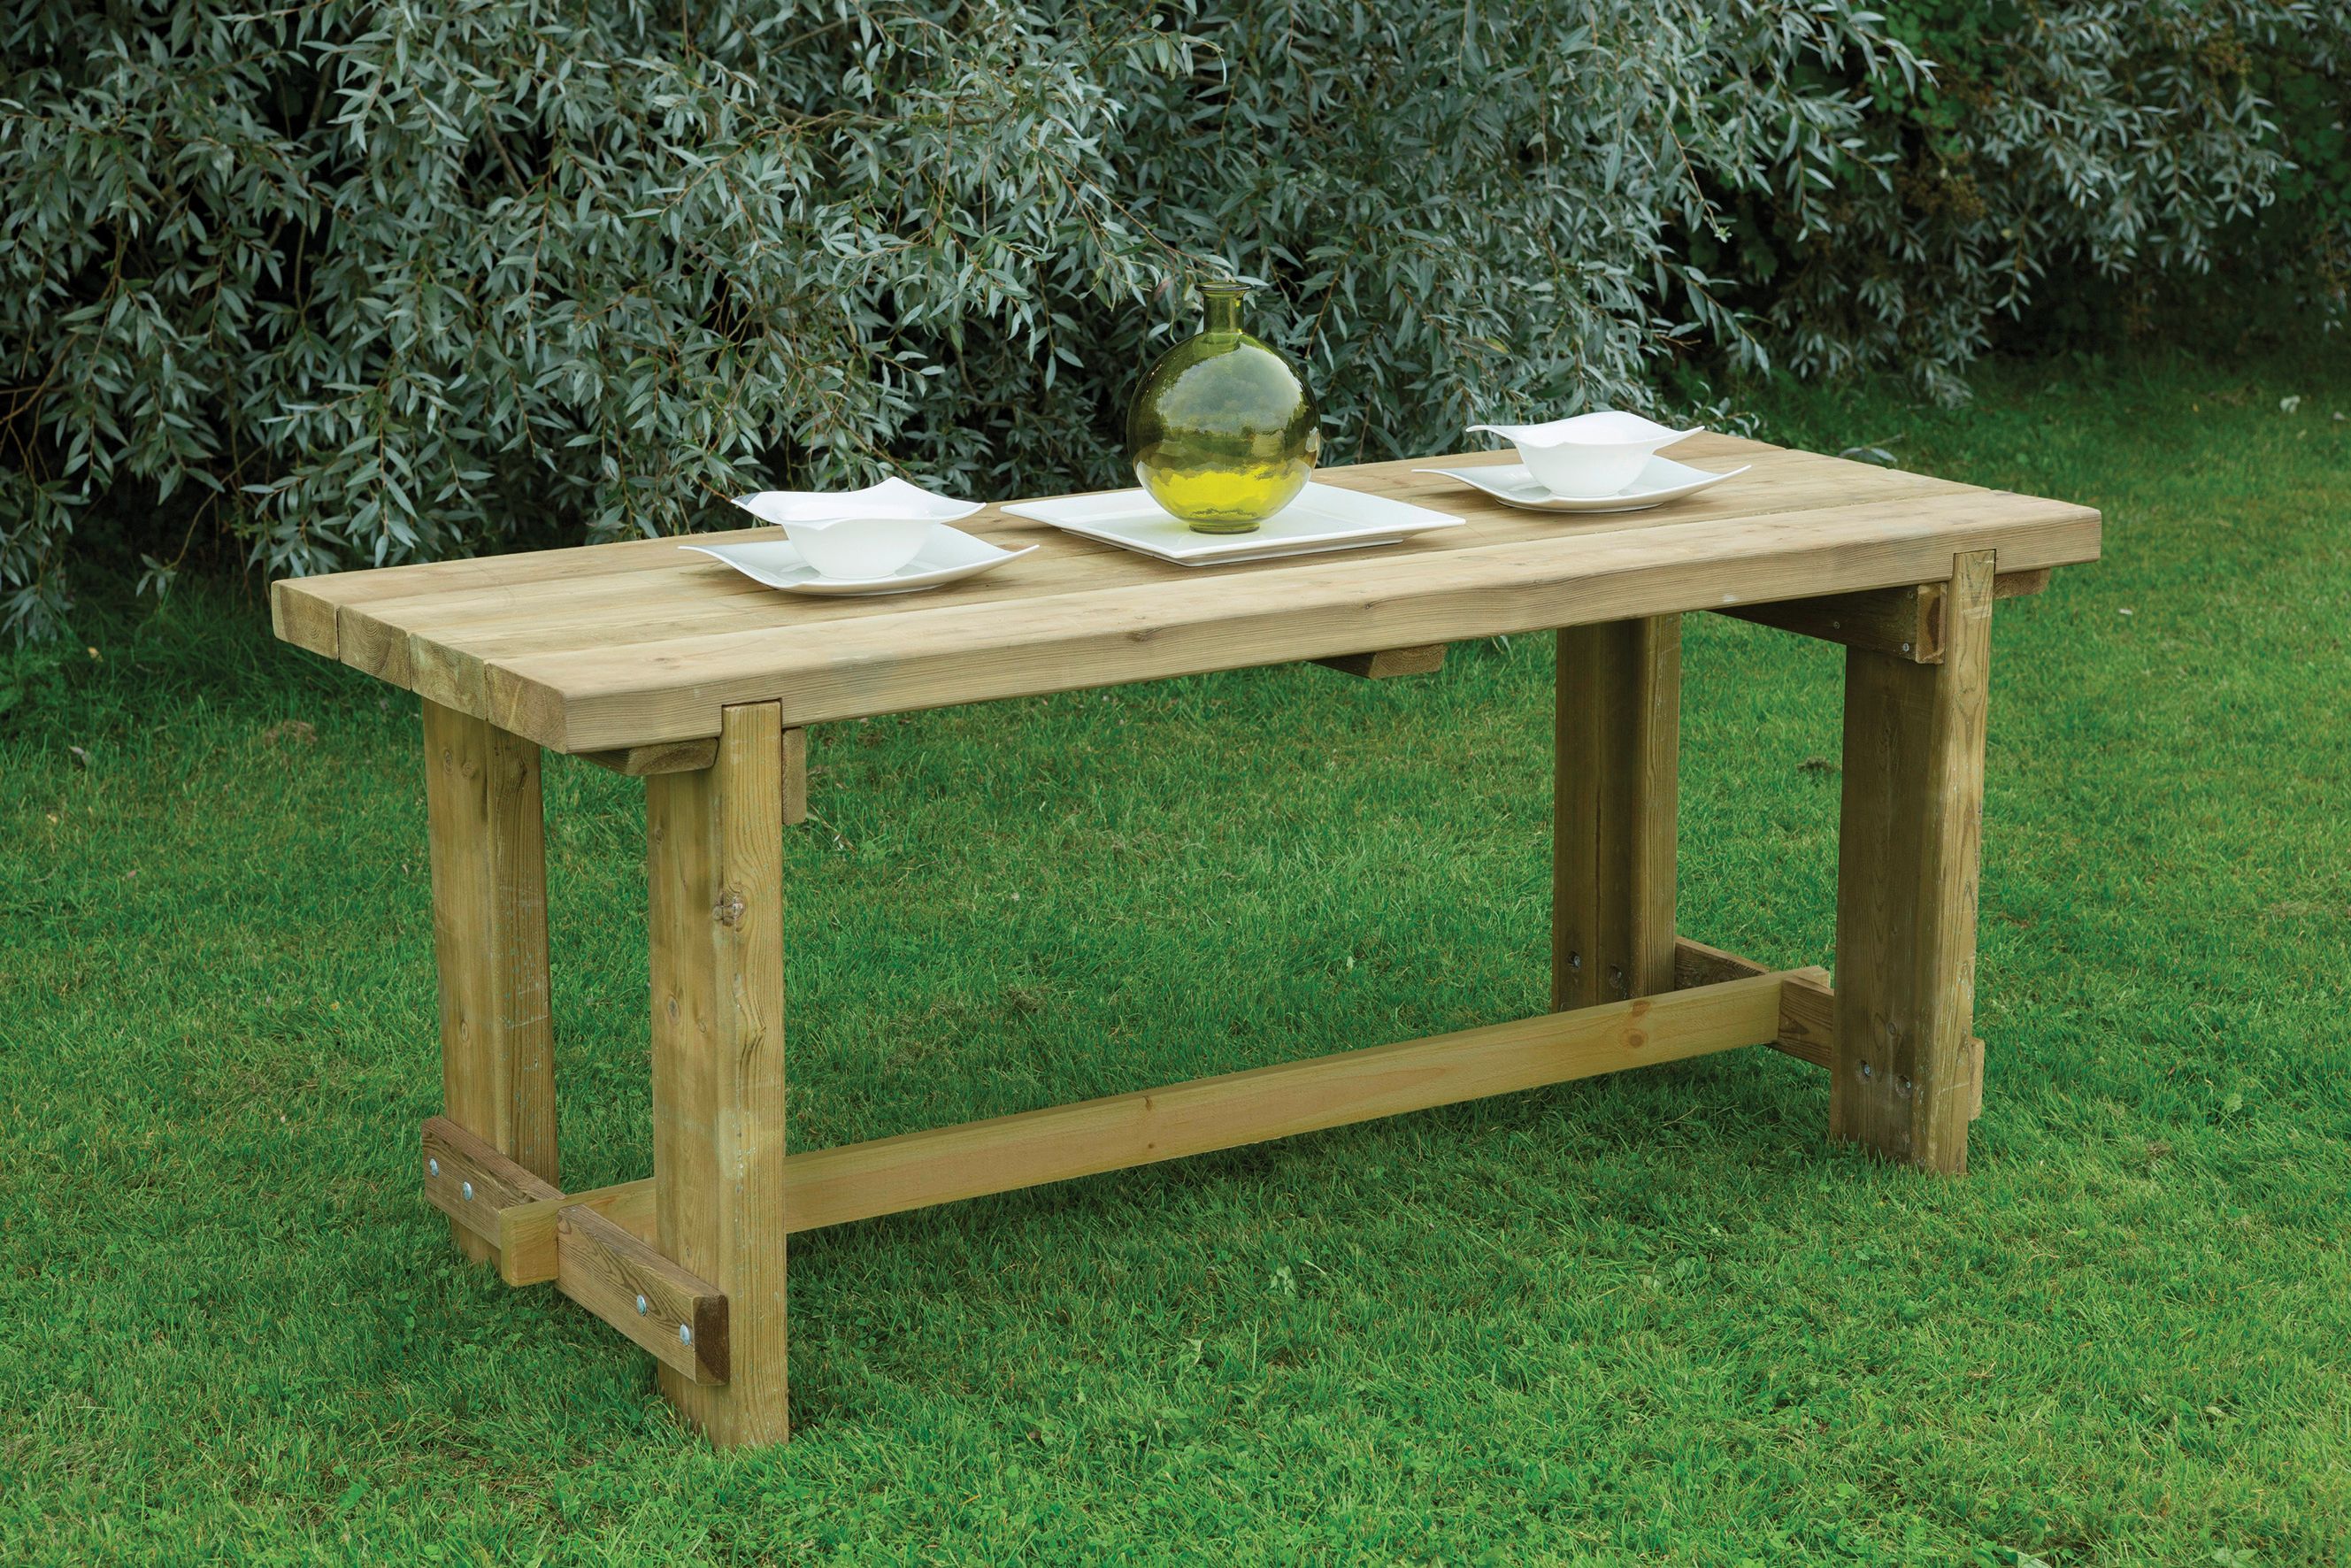 Image of Forest Garden Refectory Wooden Garden Table 1.8m